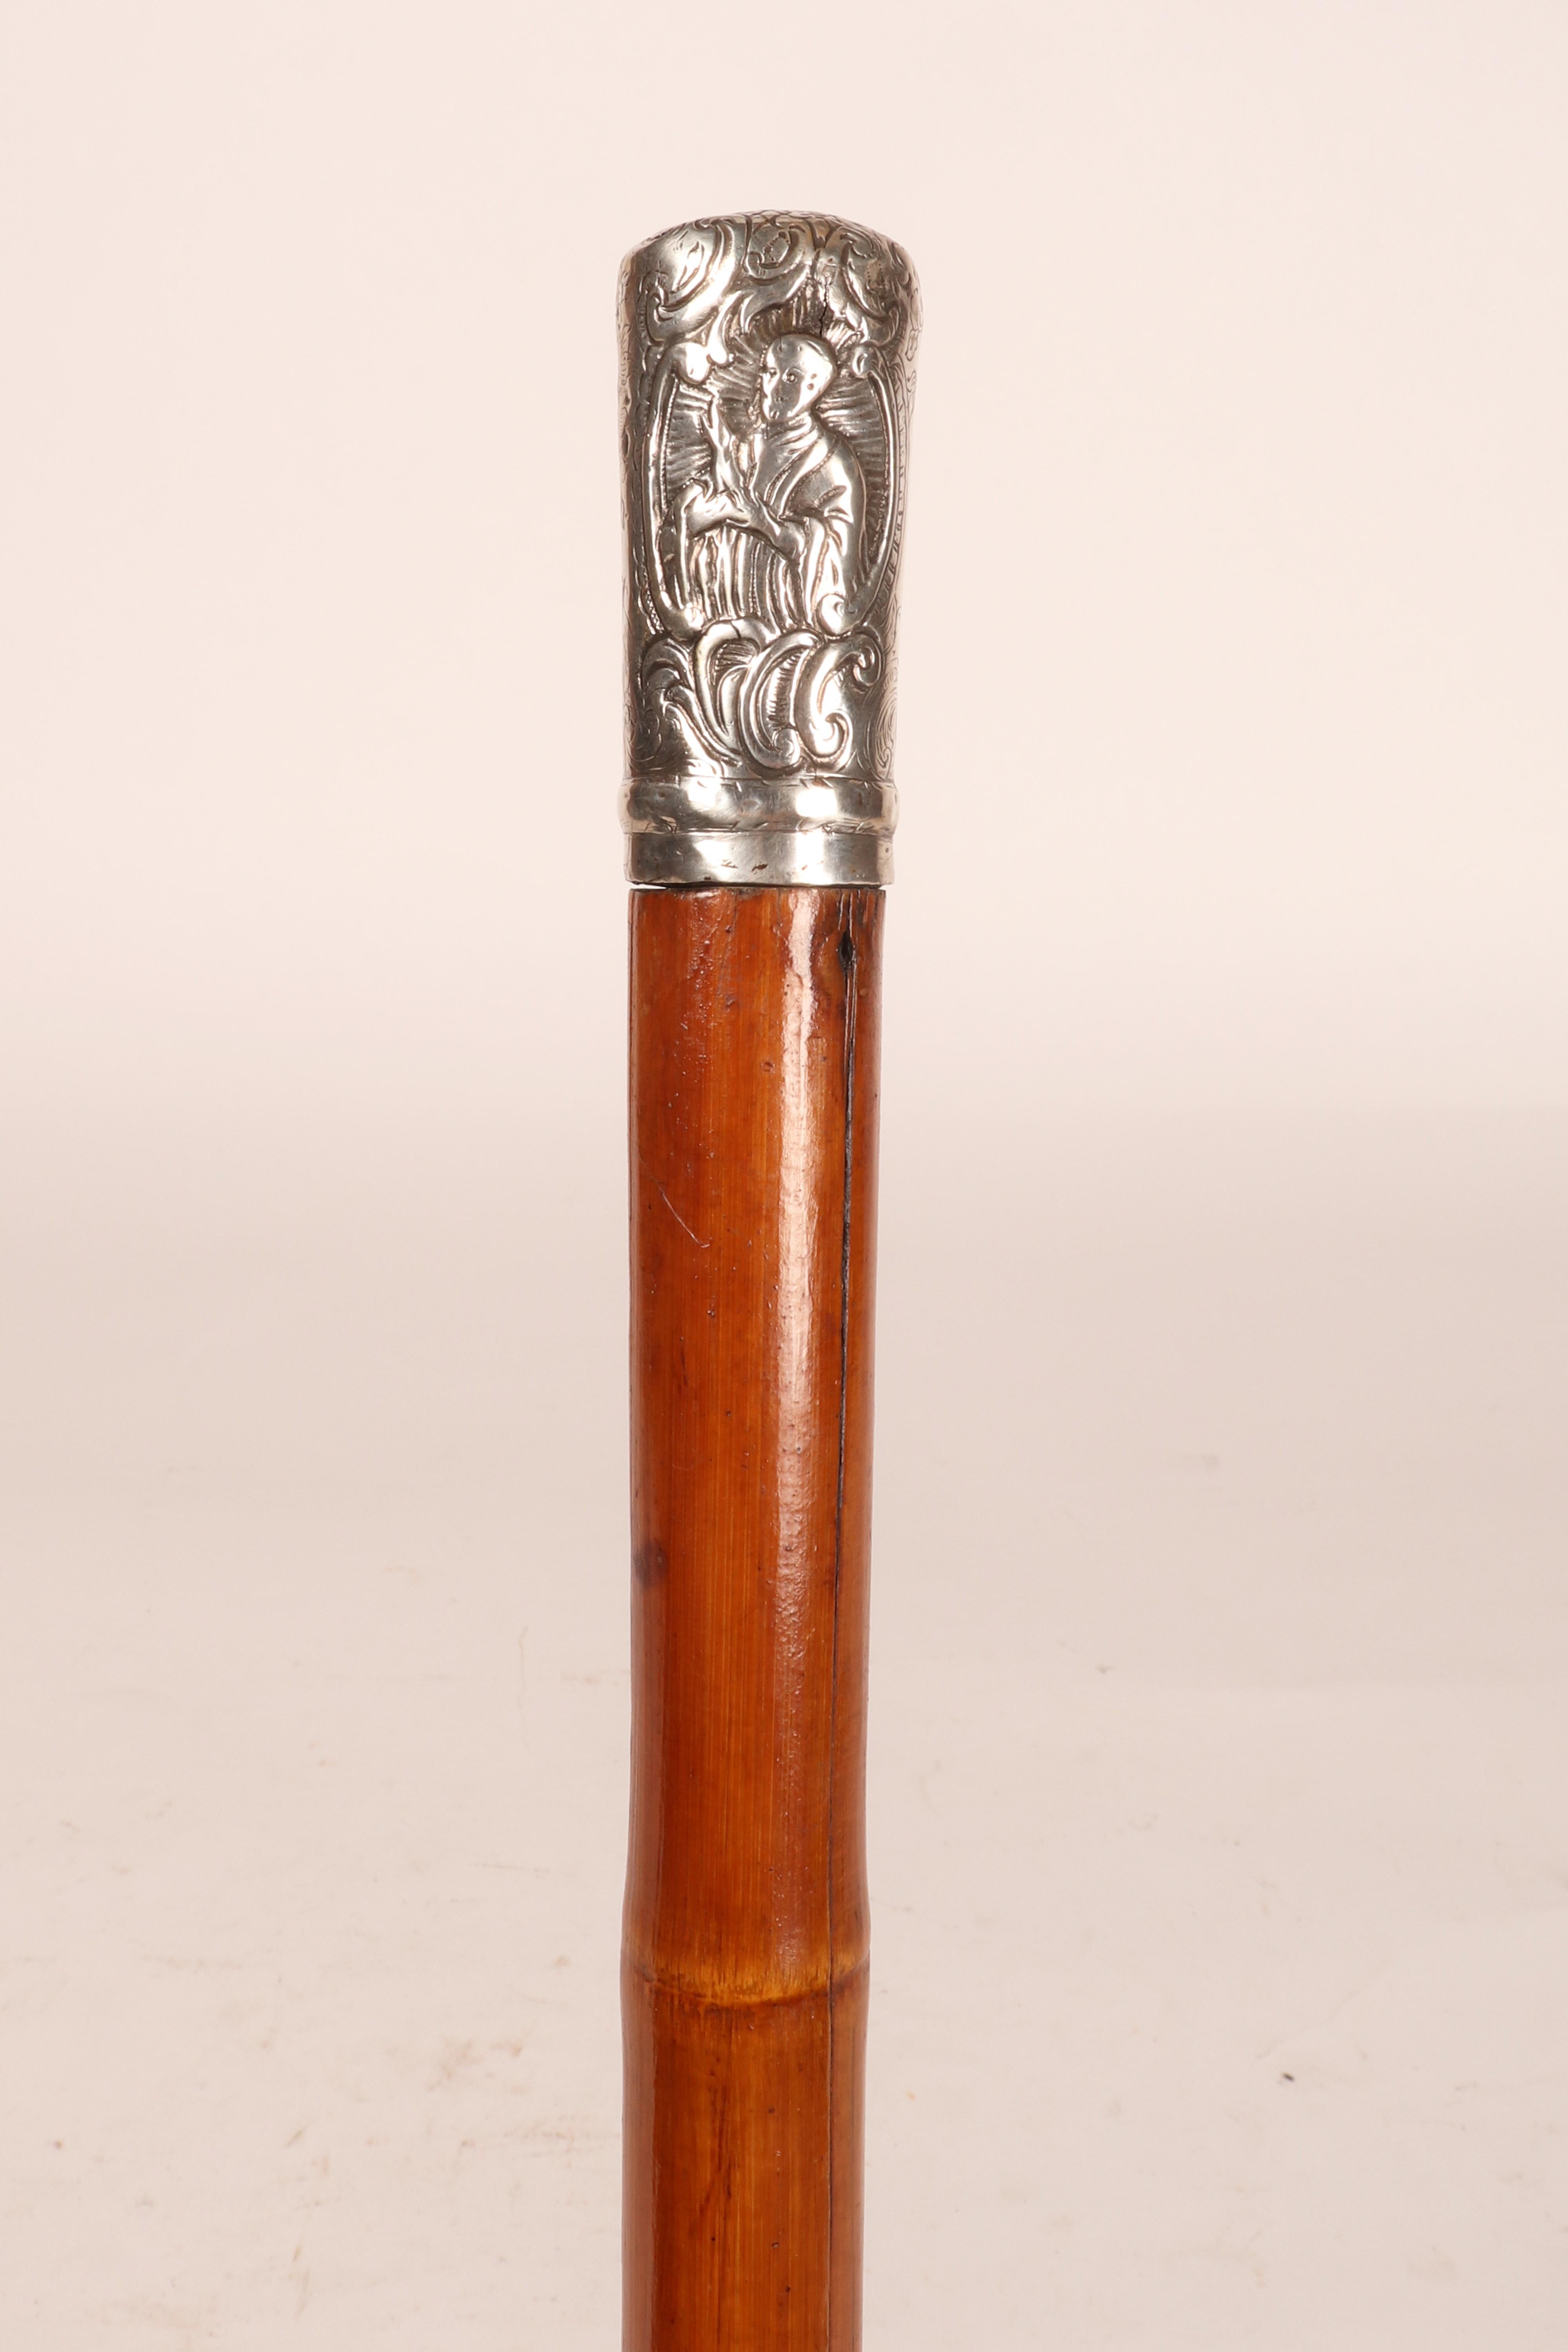 Silver Customs officer's walking stick for goods inspection, Germany, 1870. For Sale